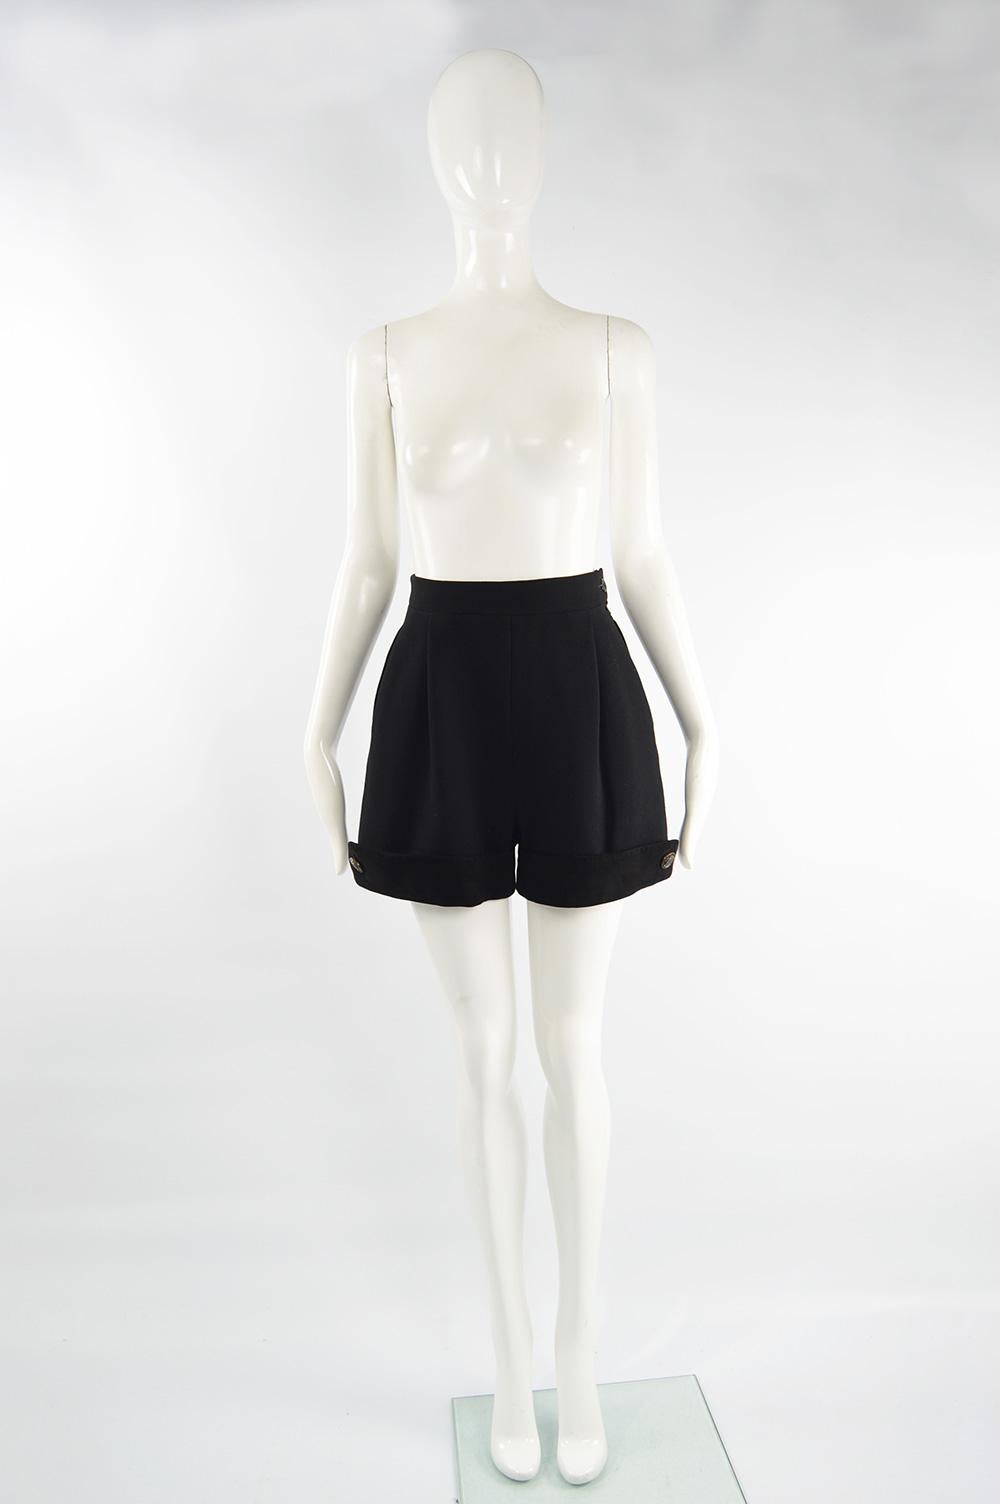 A beautiful pair of vintage Loewe women's shorts from the 80s in a black wool crepe with a wide leg, high waist and black suede turnover. The buttons are engraved with Loewe Madrid 1846 and the lining has the Loewe logo woven in satin